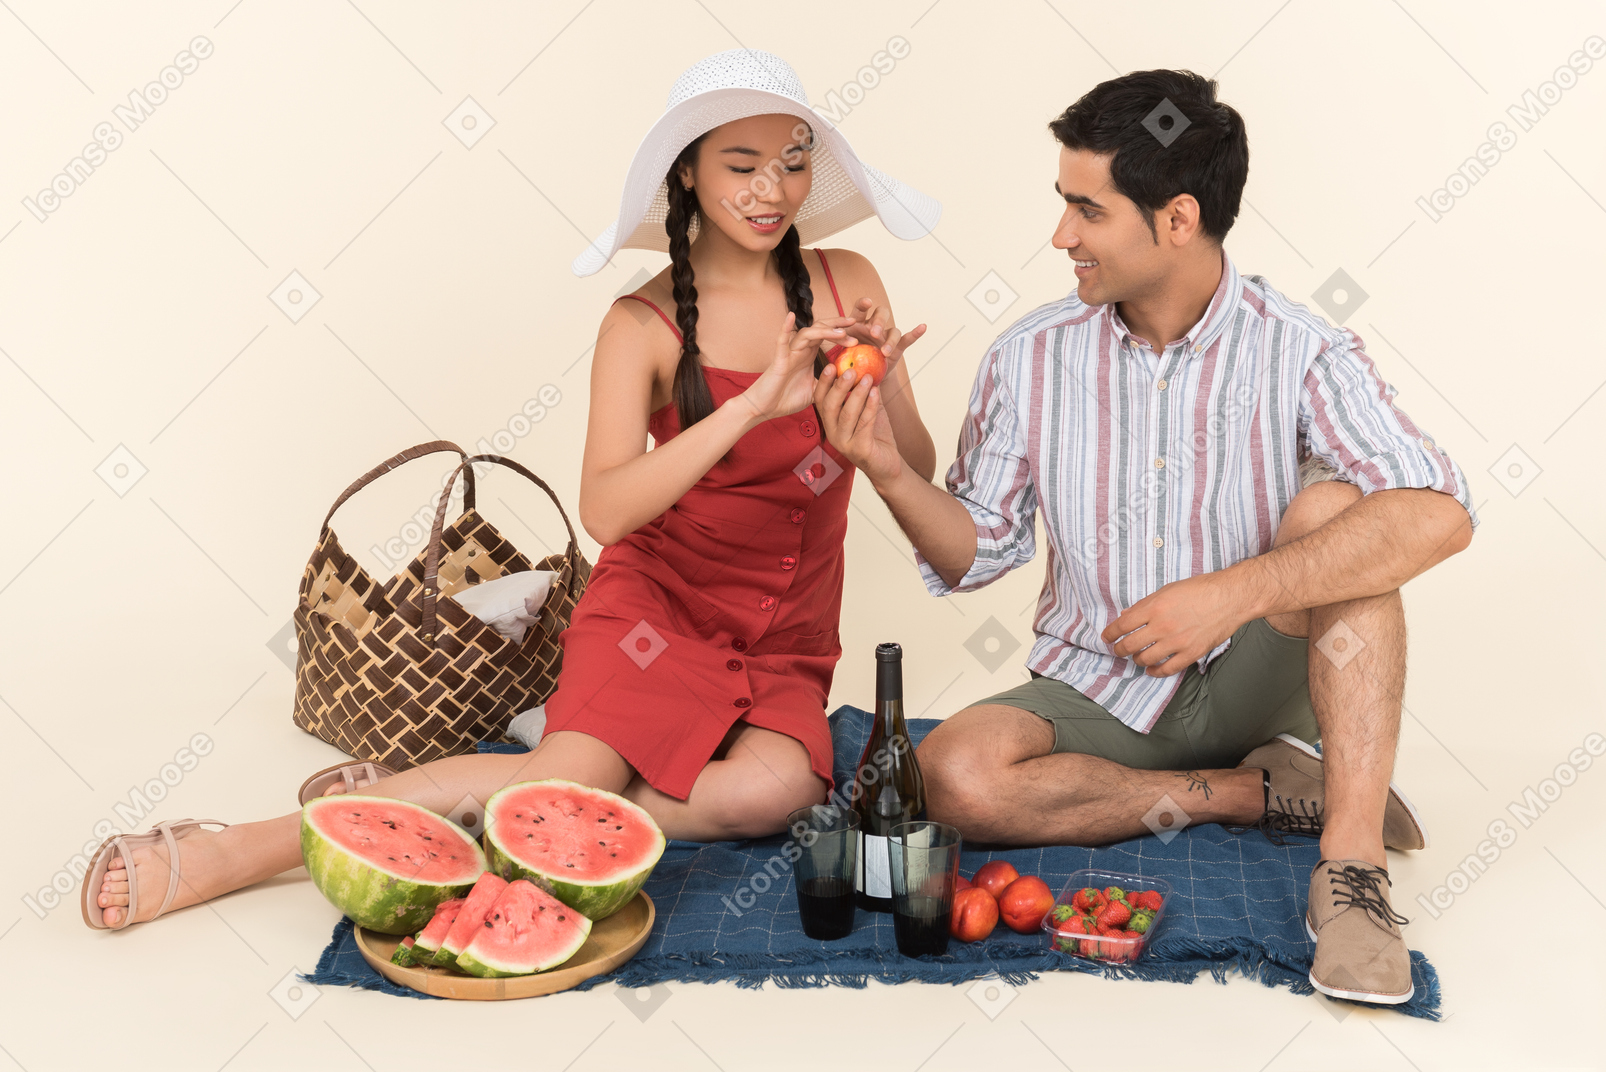 Young man giving fruits to a girl while they having picnic